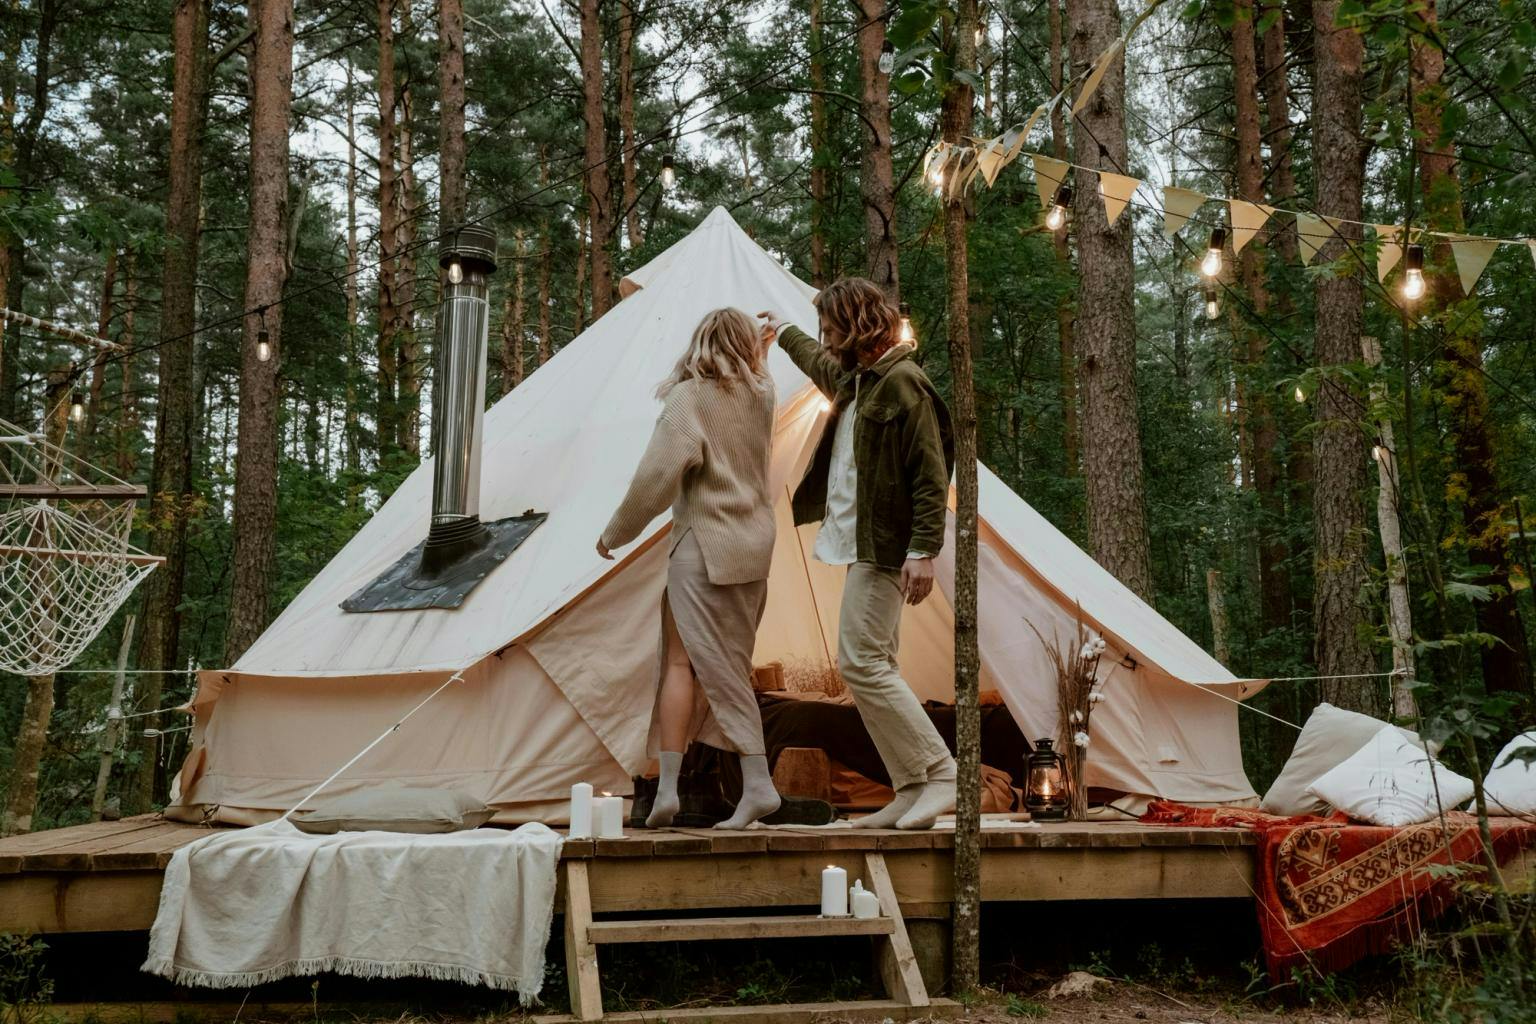 A couple enter a yurt style tent in a woodland surrounded by fairylights